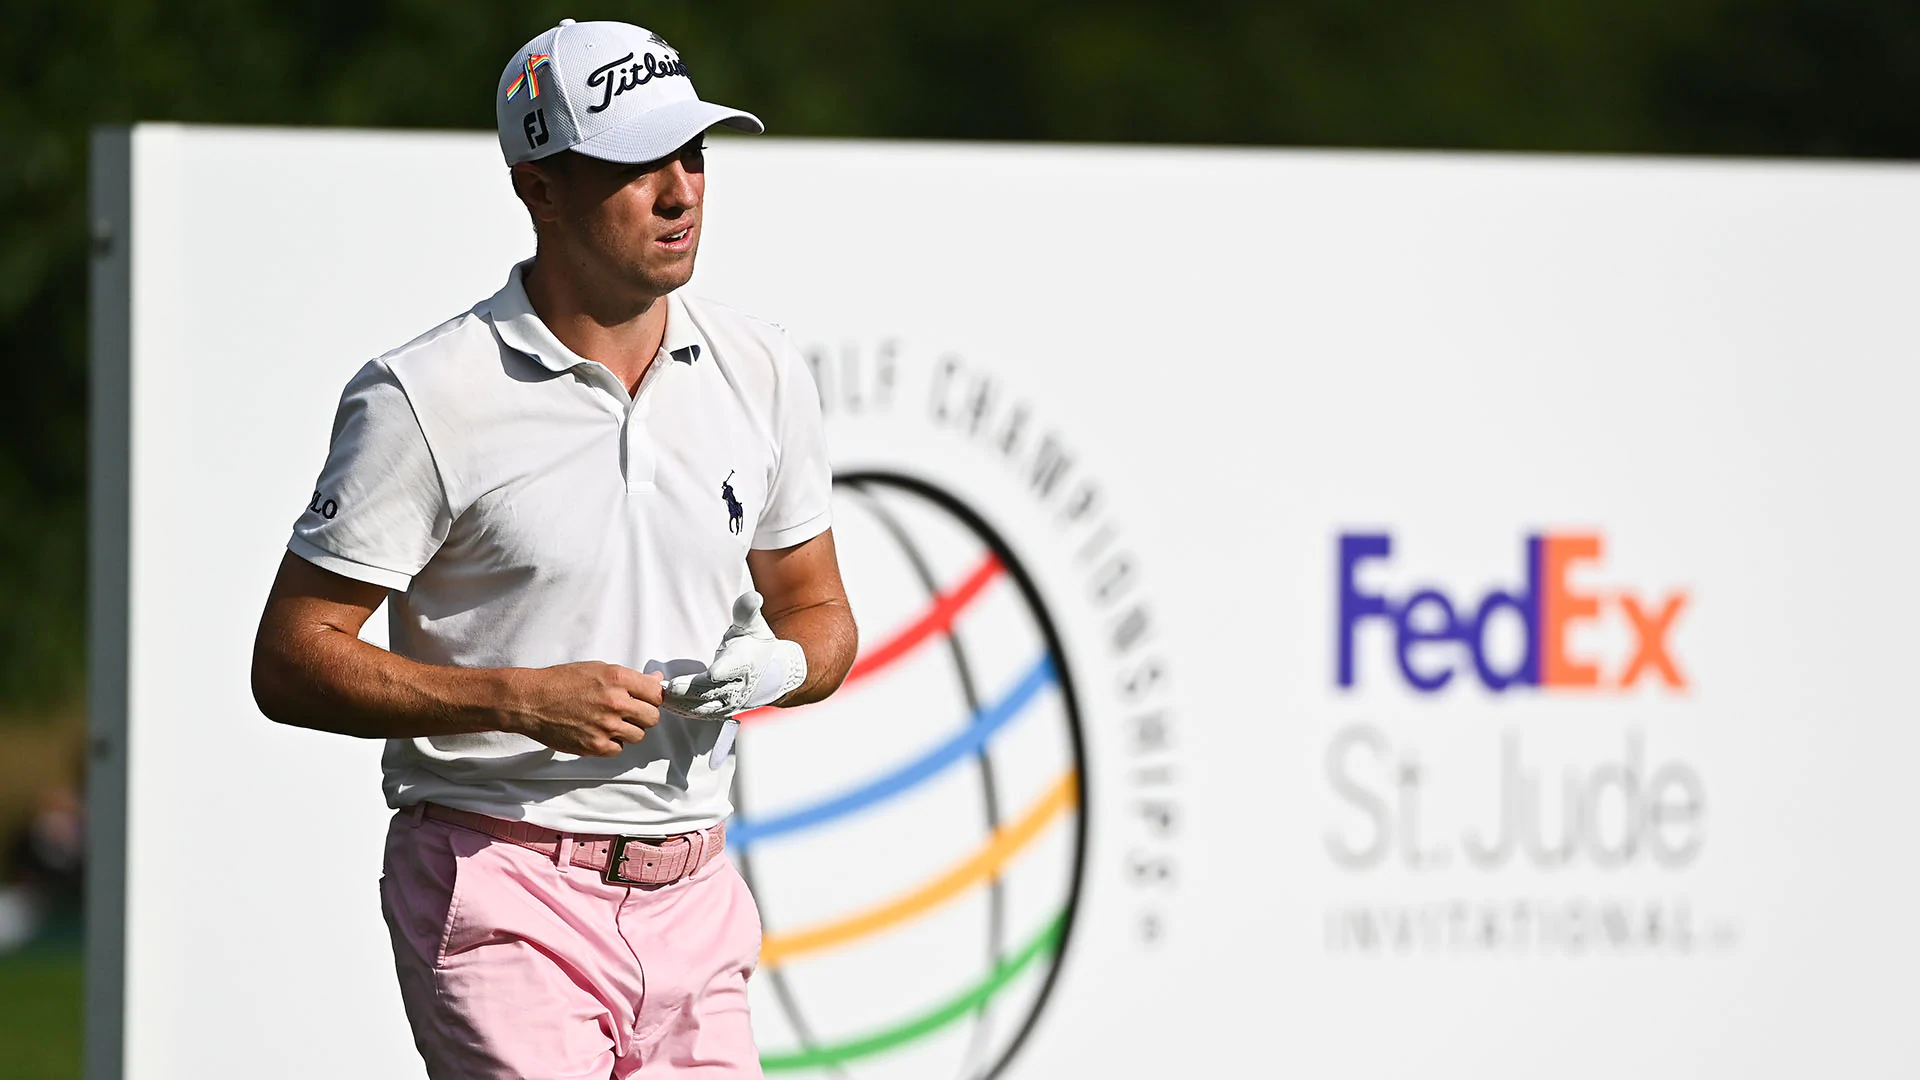 A ‘more complete’ Justin Thomas better prepared to hold world No. 1 spot